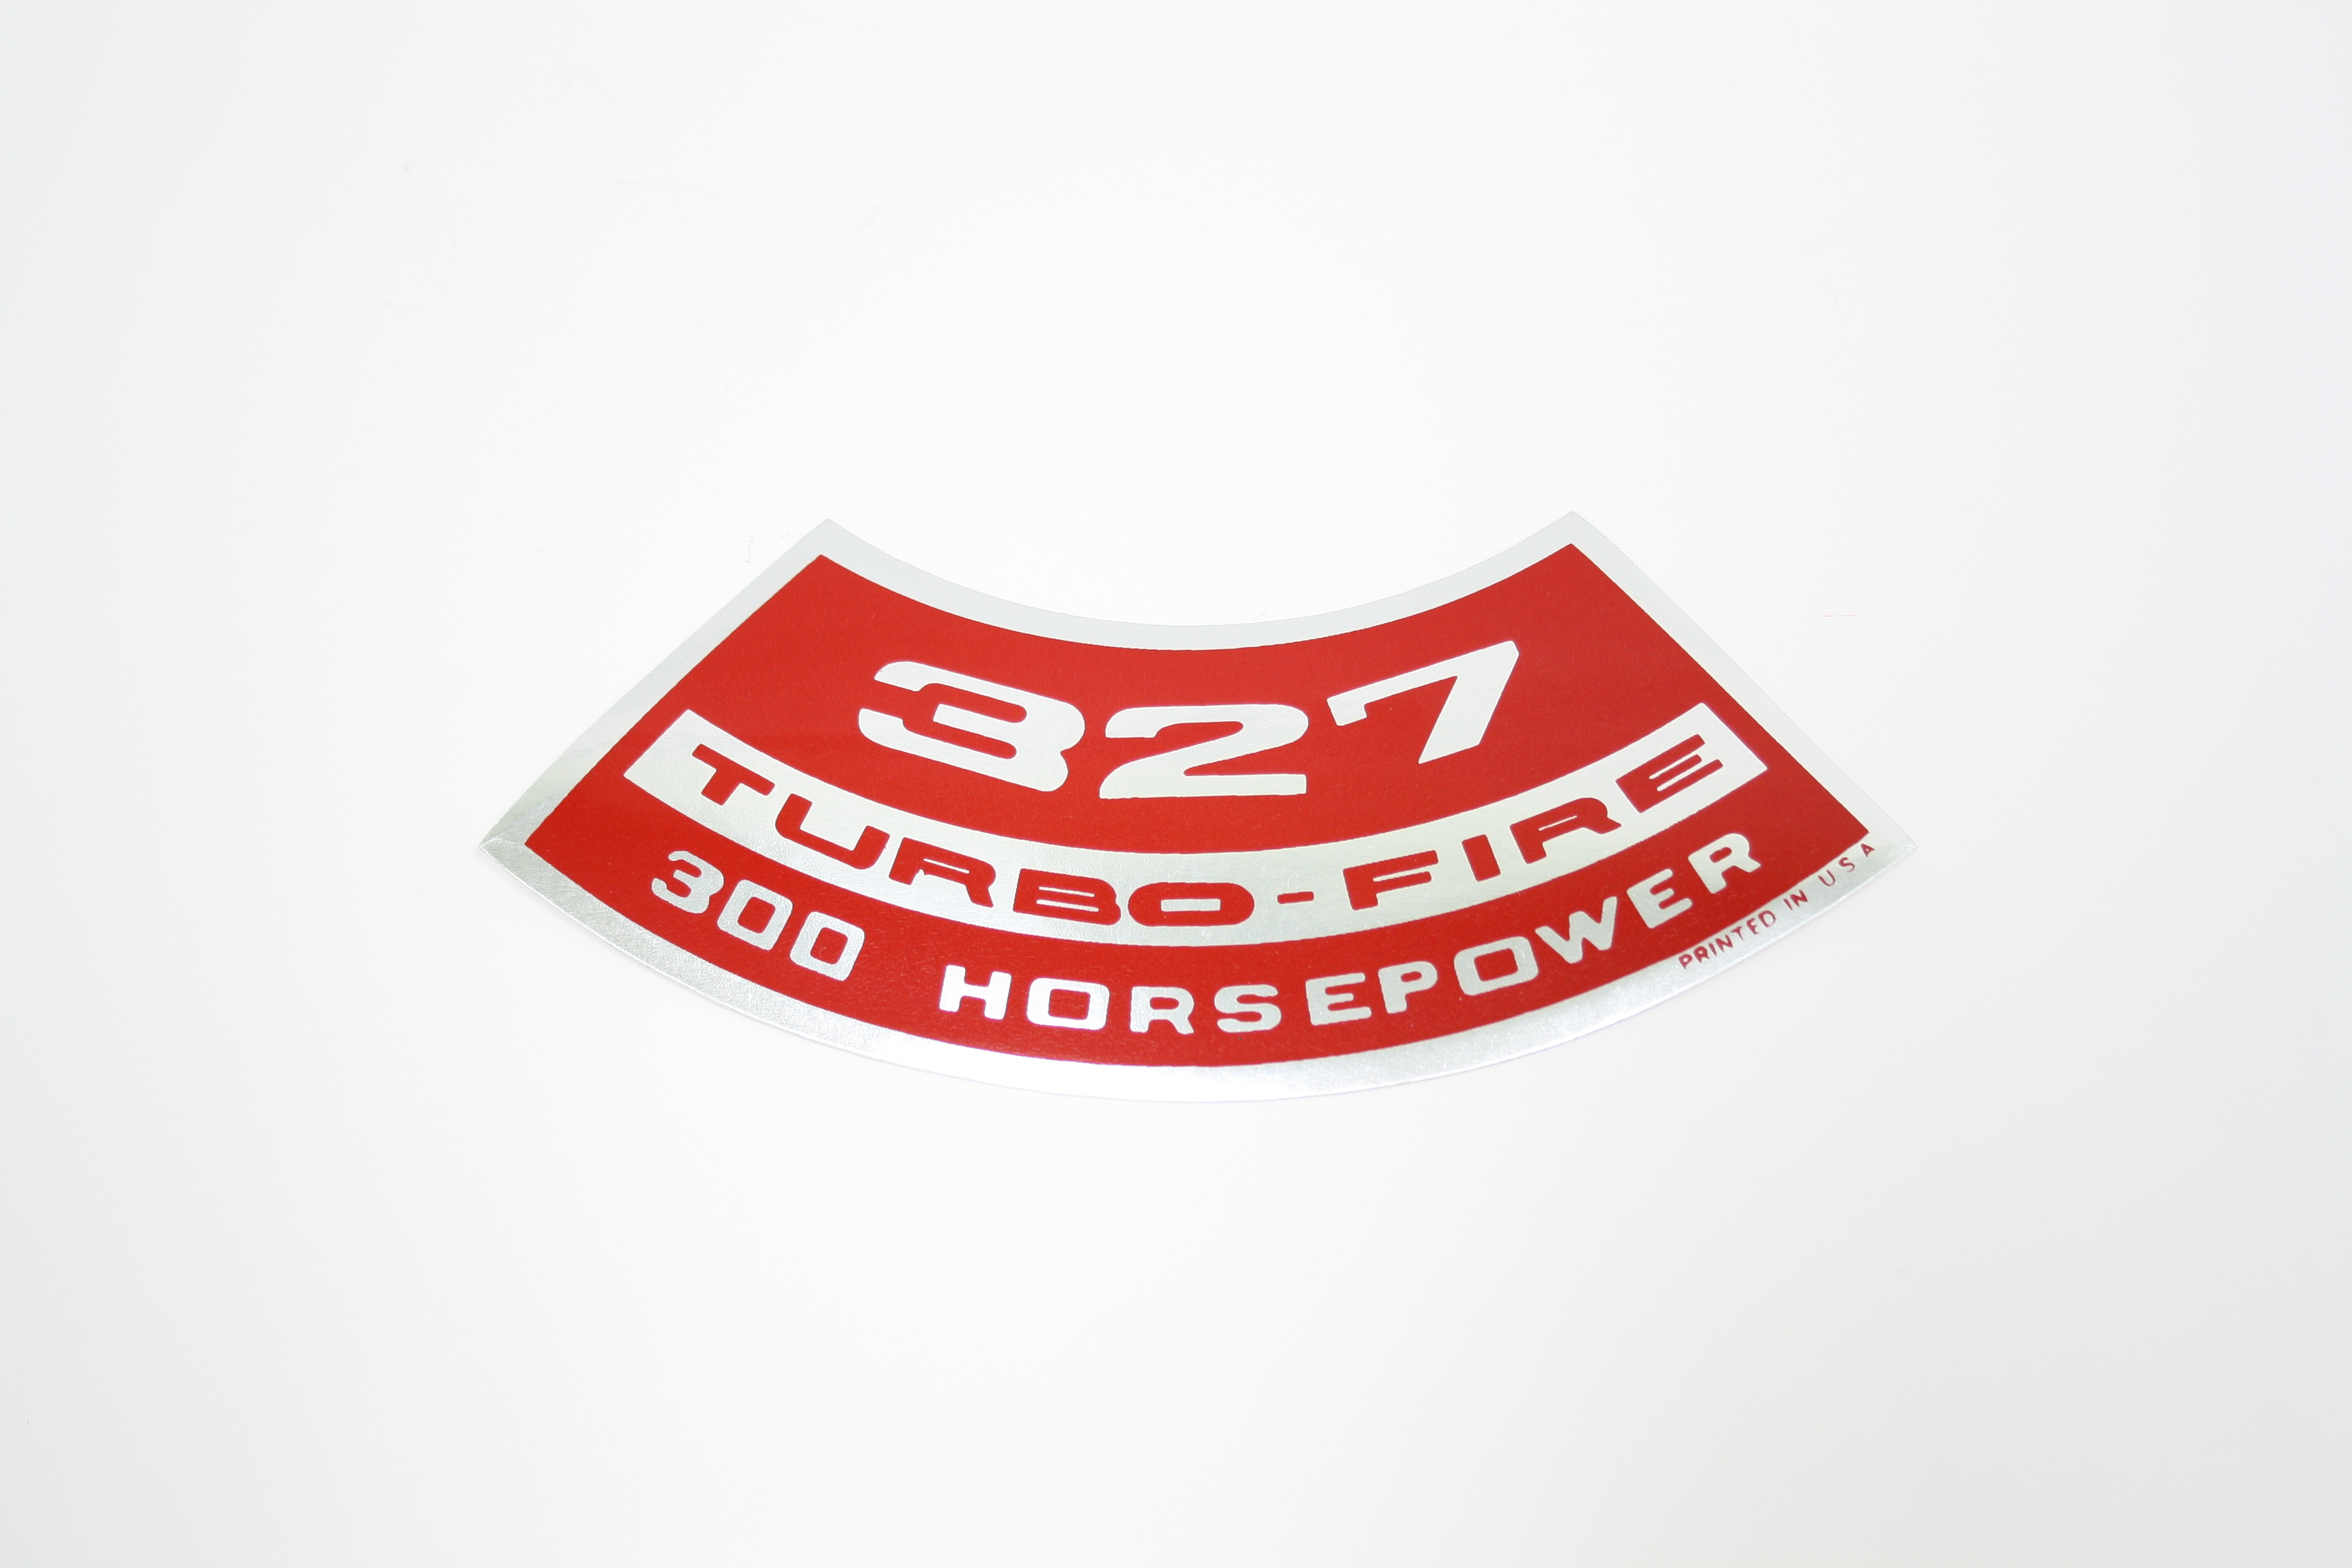 1967-1968 Corvette Air Cleaner Decal 327/300 HP Turbo-Fire